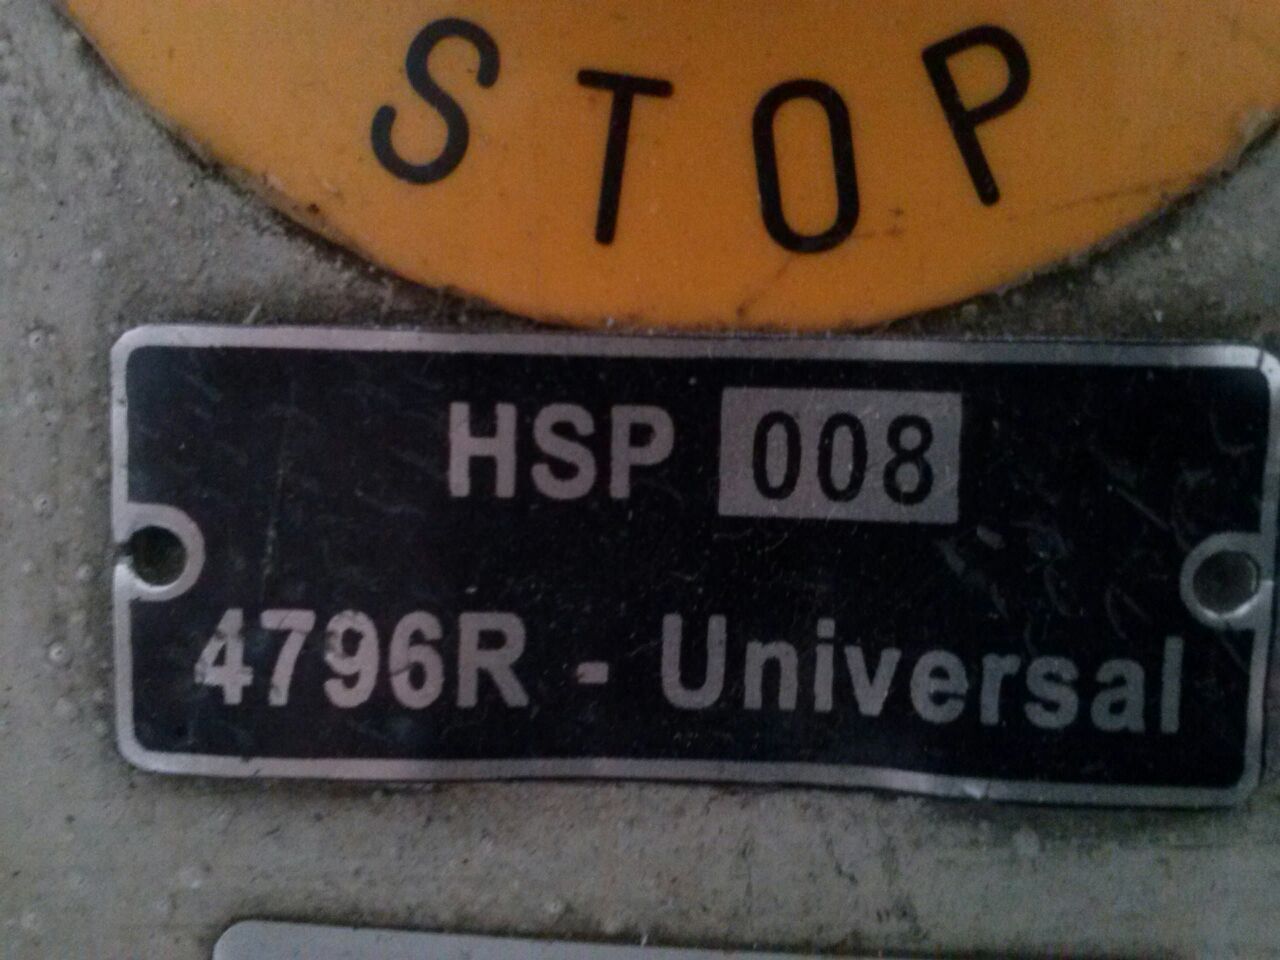 Photo Used UNIVERSAL HSP 4796R For Sale